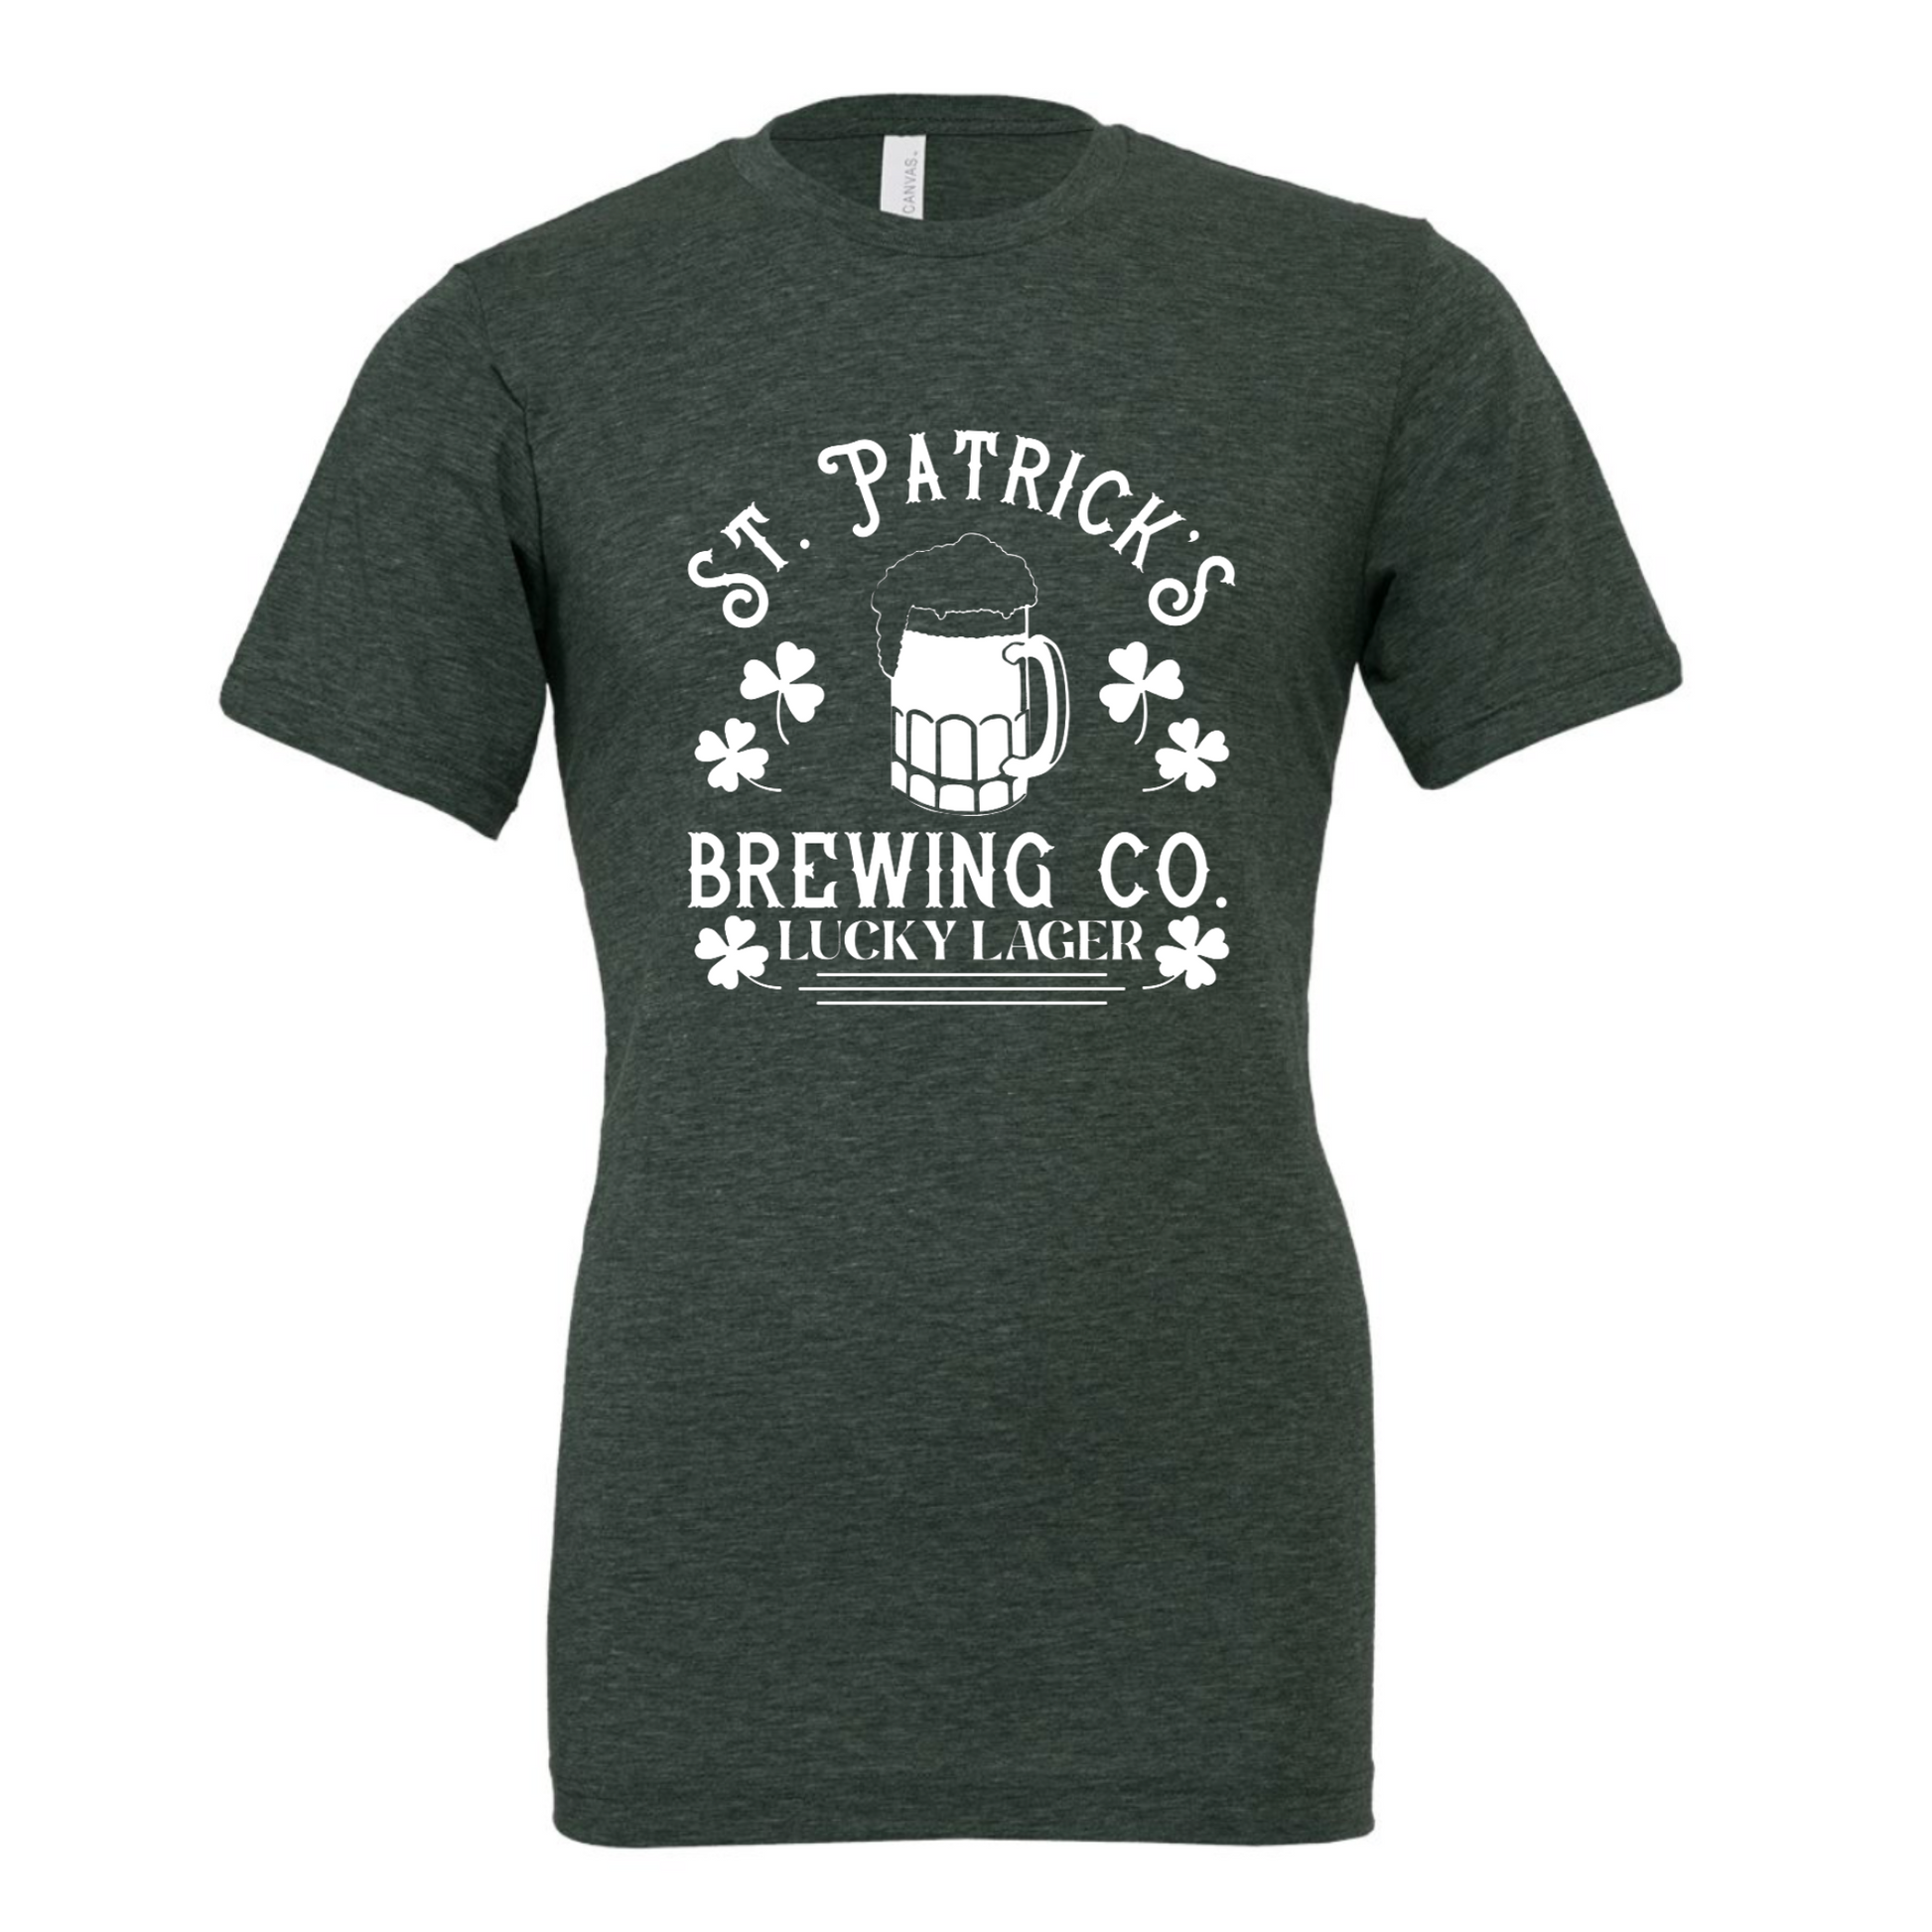 St. Patricks Brewing Co. T-Shirt in heather forest. The front has a white design with the saying "St. Patrick's Brewing Co. Lucky Lager" with a glass of beer and four leaf clovers surrounding the saying. This is the front view of the shirt.